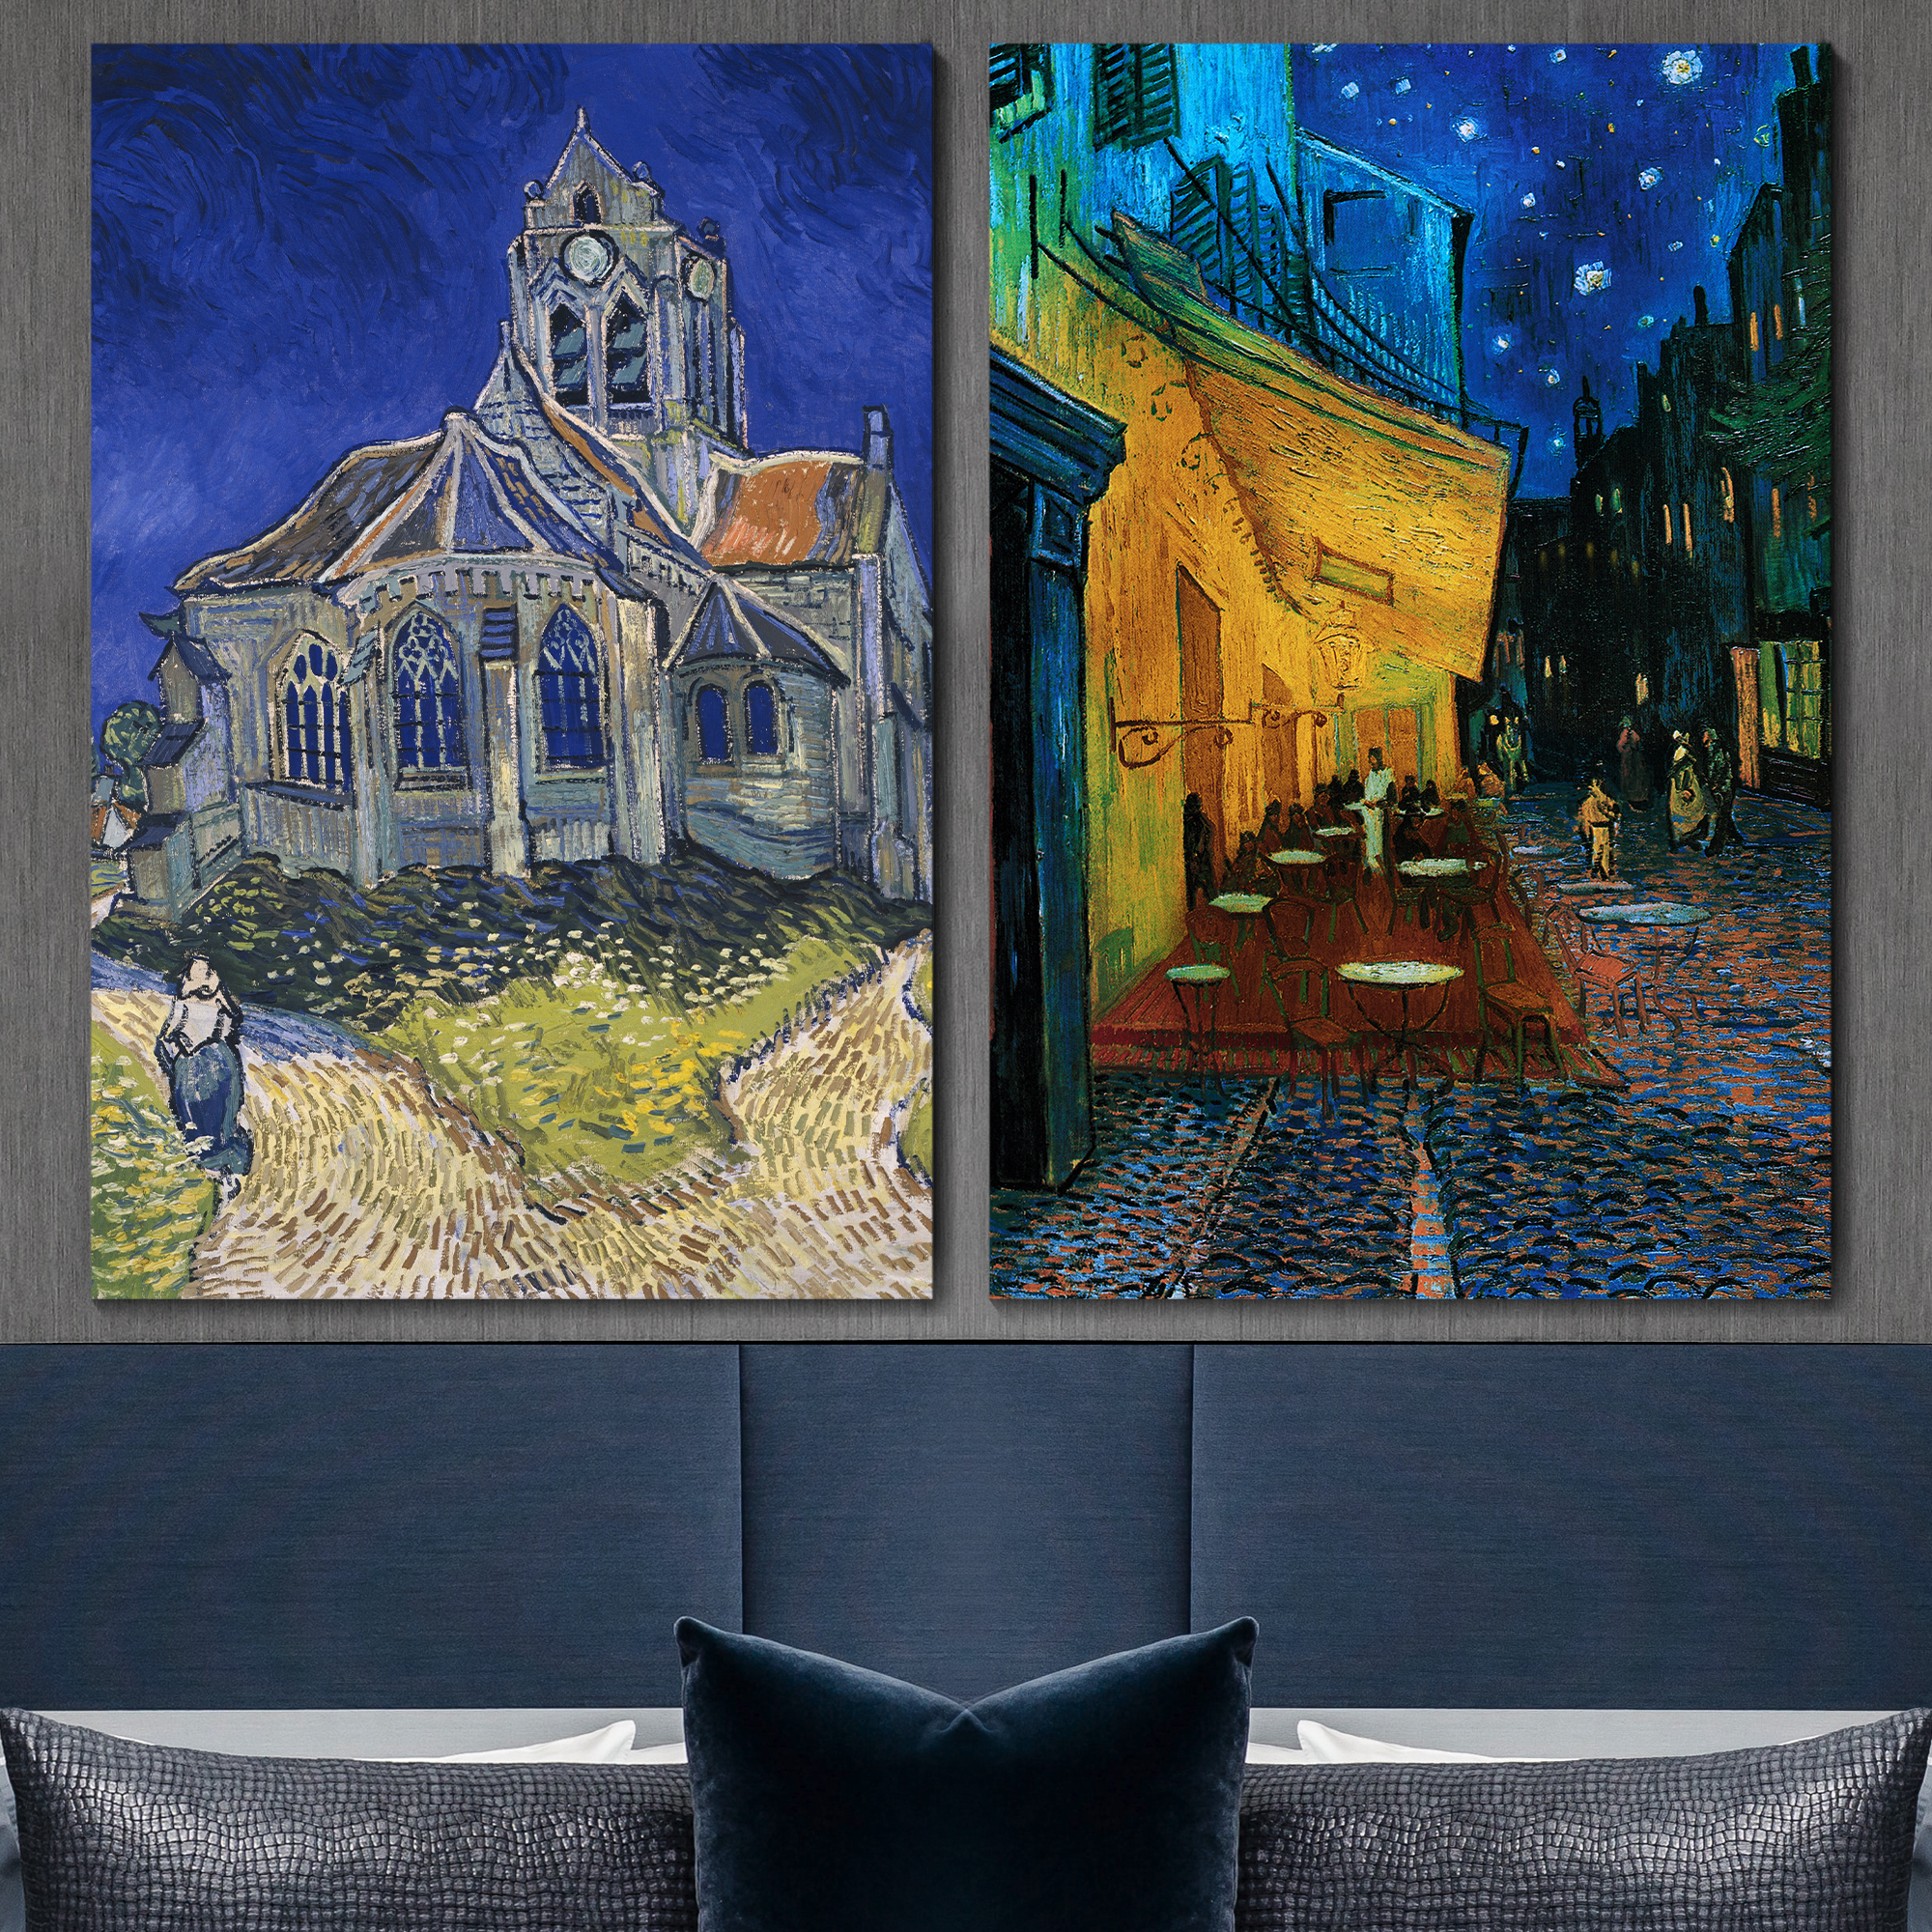 Wall26 - Cafe Terrace at Night/The Church at Auvers by Vincent Van Gogh - Oil Painting Reproduction in Set of 2 | Canvas Prints Wall Art, Ready to Hang - 16